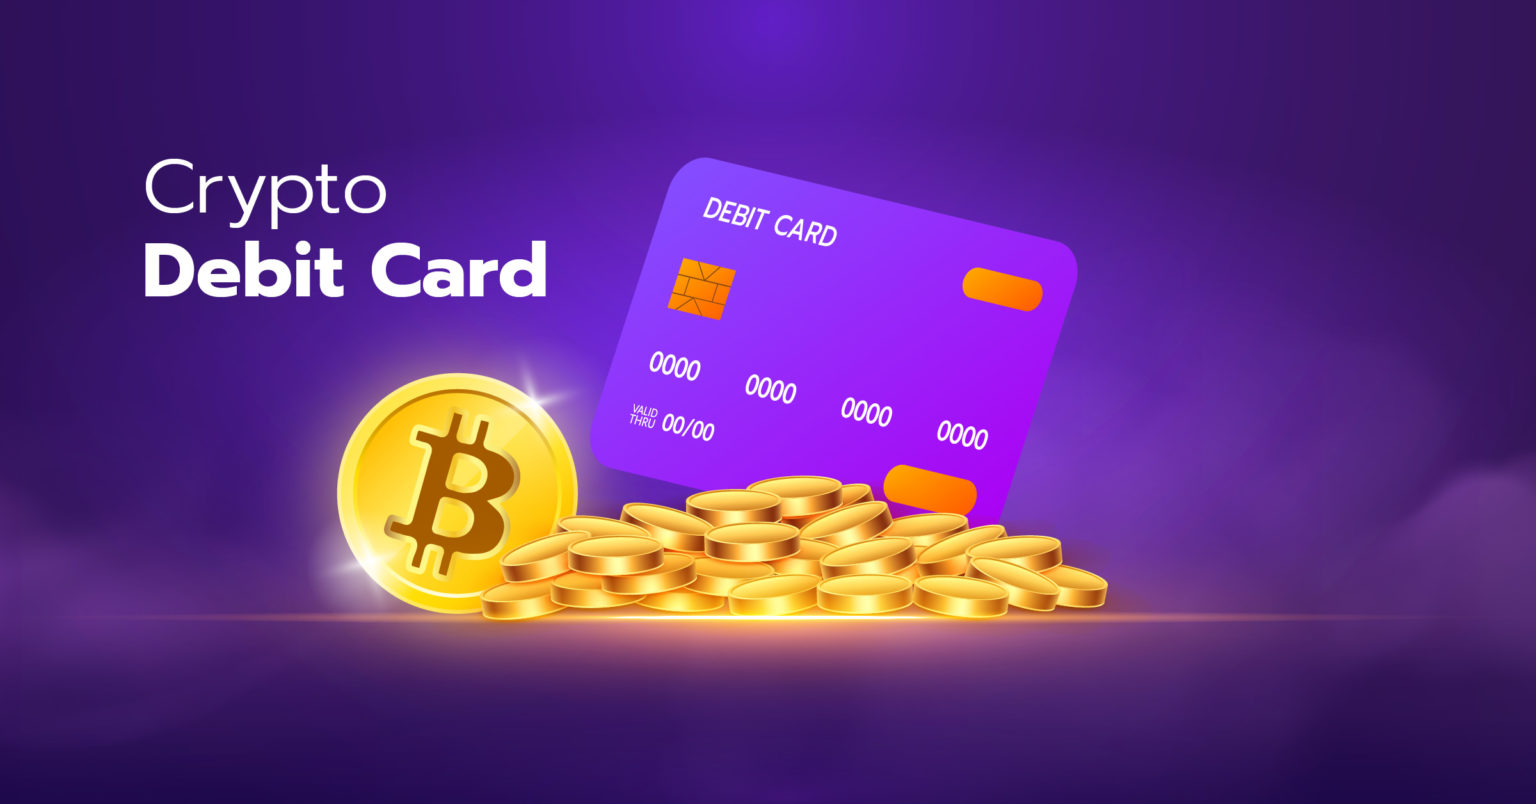 Crypto Debit Card NZ: What Are Your Best Options? - Easy ...